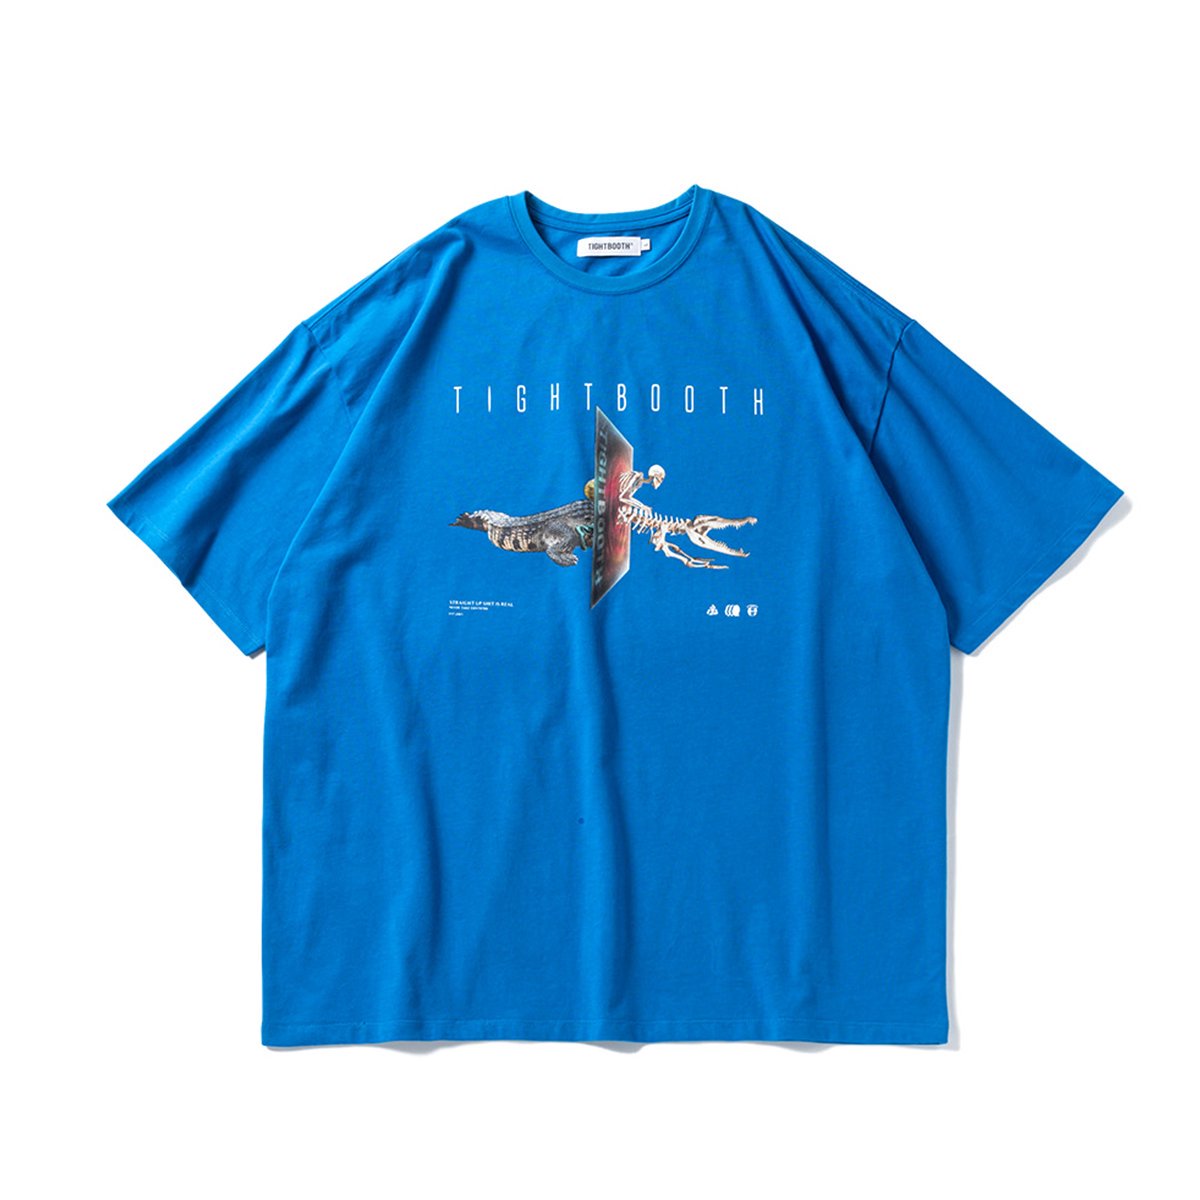 <img class='new_mark_img1' src='https://img.shop-pro.jp/img/new/icons8.gif' style='border:none;display:inline;margin:0px;padding:0px;width:auto;' />TIGHTBOOTHInitialize T-Shirt (Turquoise)
                          </a>
            <span class=